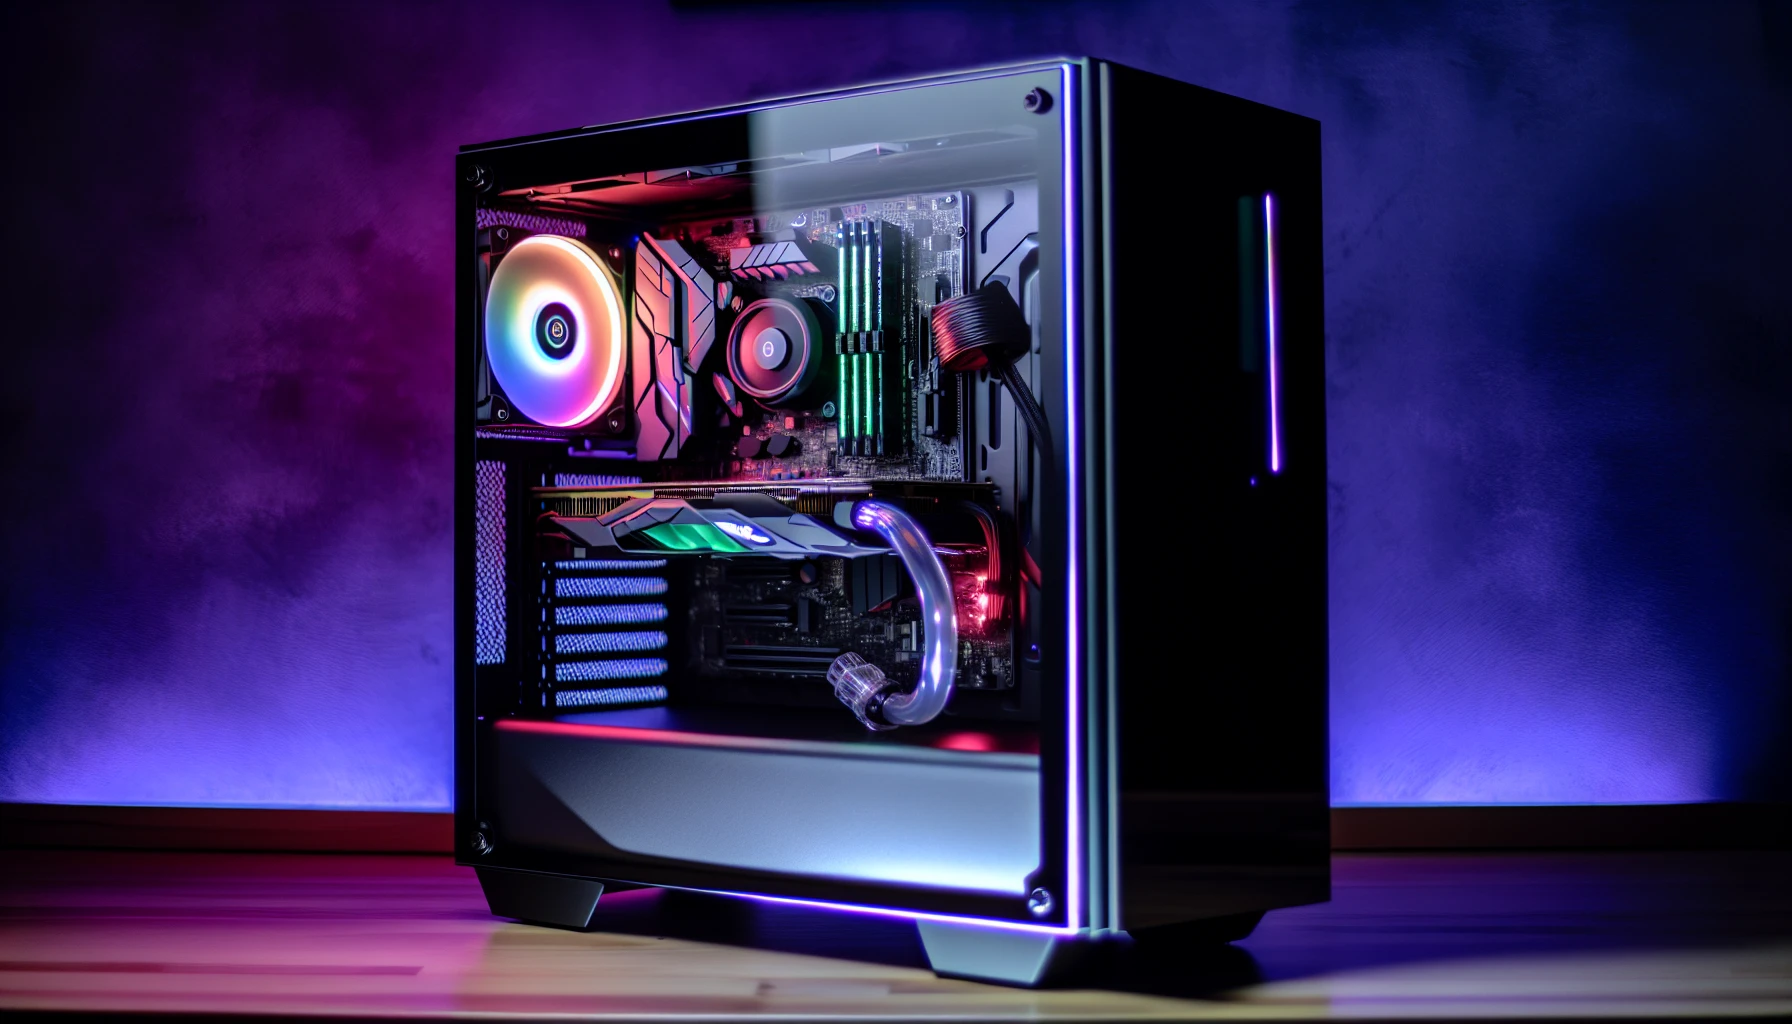 A powerful gaming PC with advanced hardware components